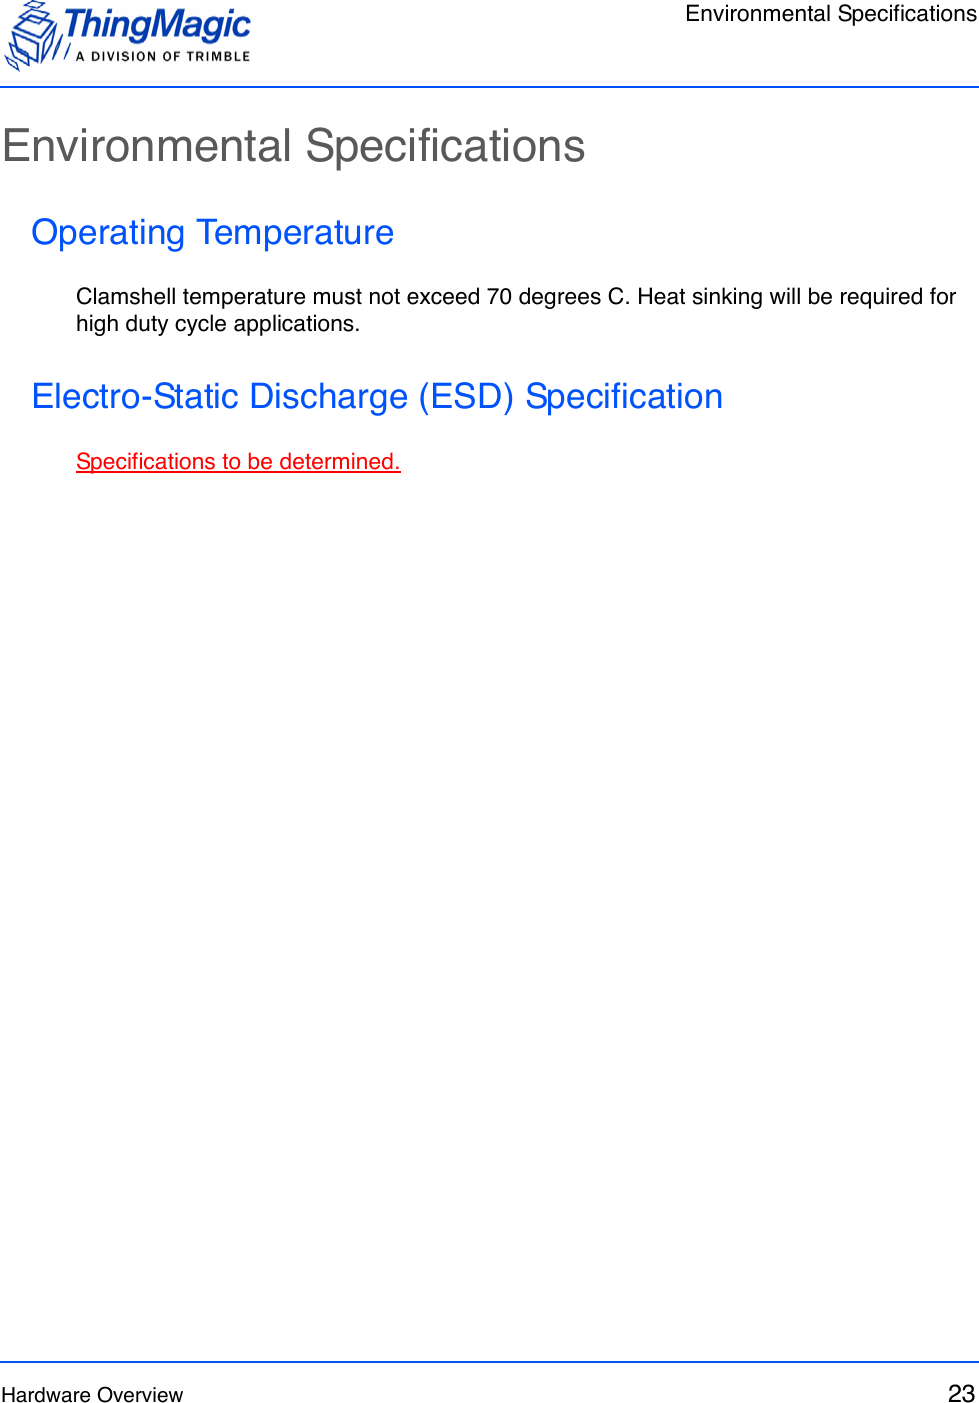 Environmental SpecificationsHardware Overview 23Environmental SpecificationsOperating TemperatureClamshell temperature must not exceed 70 degrees C. Heat sinking will be required for high duty cycle applications.Electro-Static Discharge (ESD) SpecificationSpecifications to be determined.